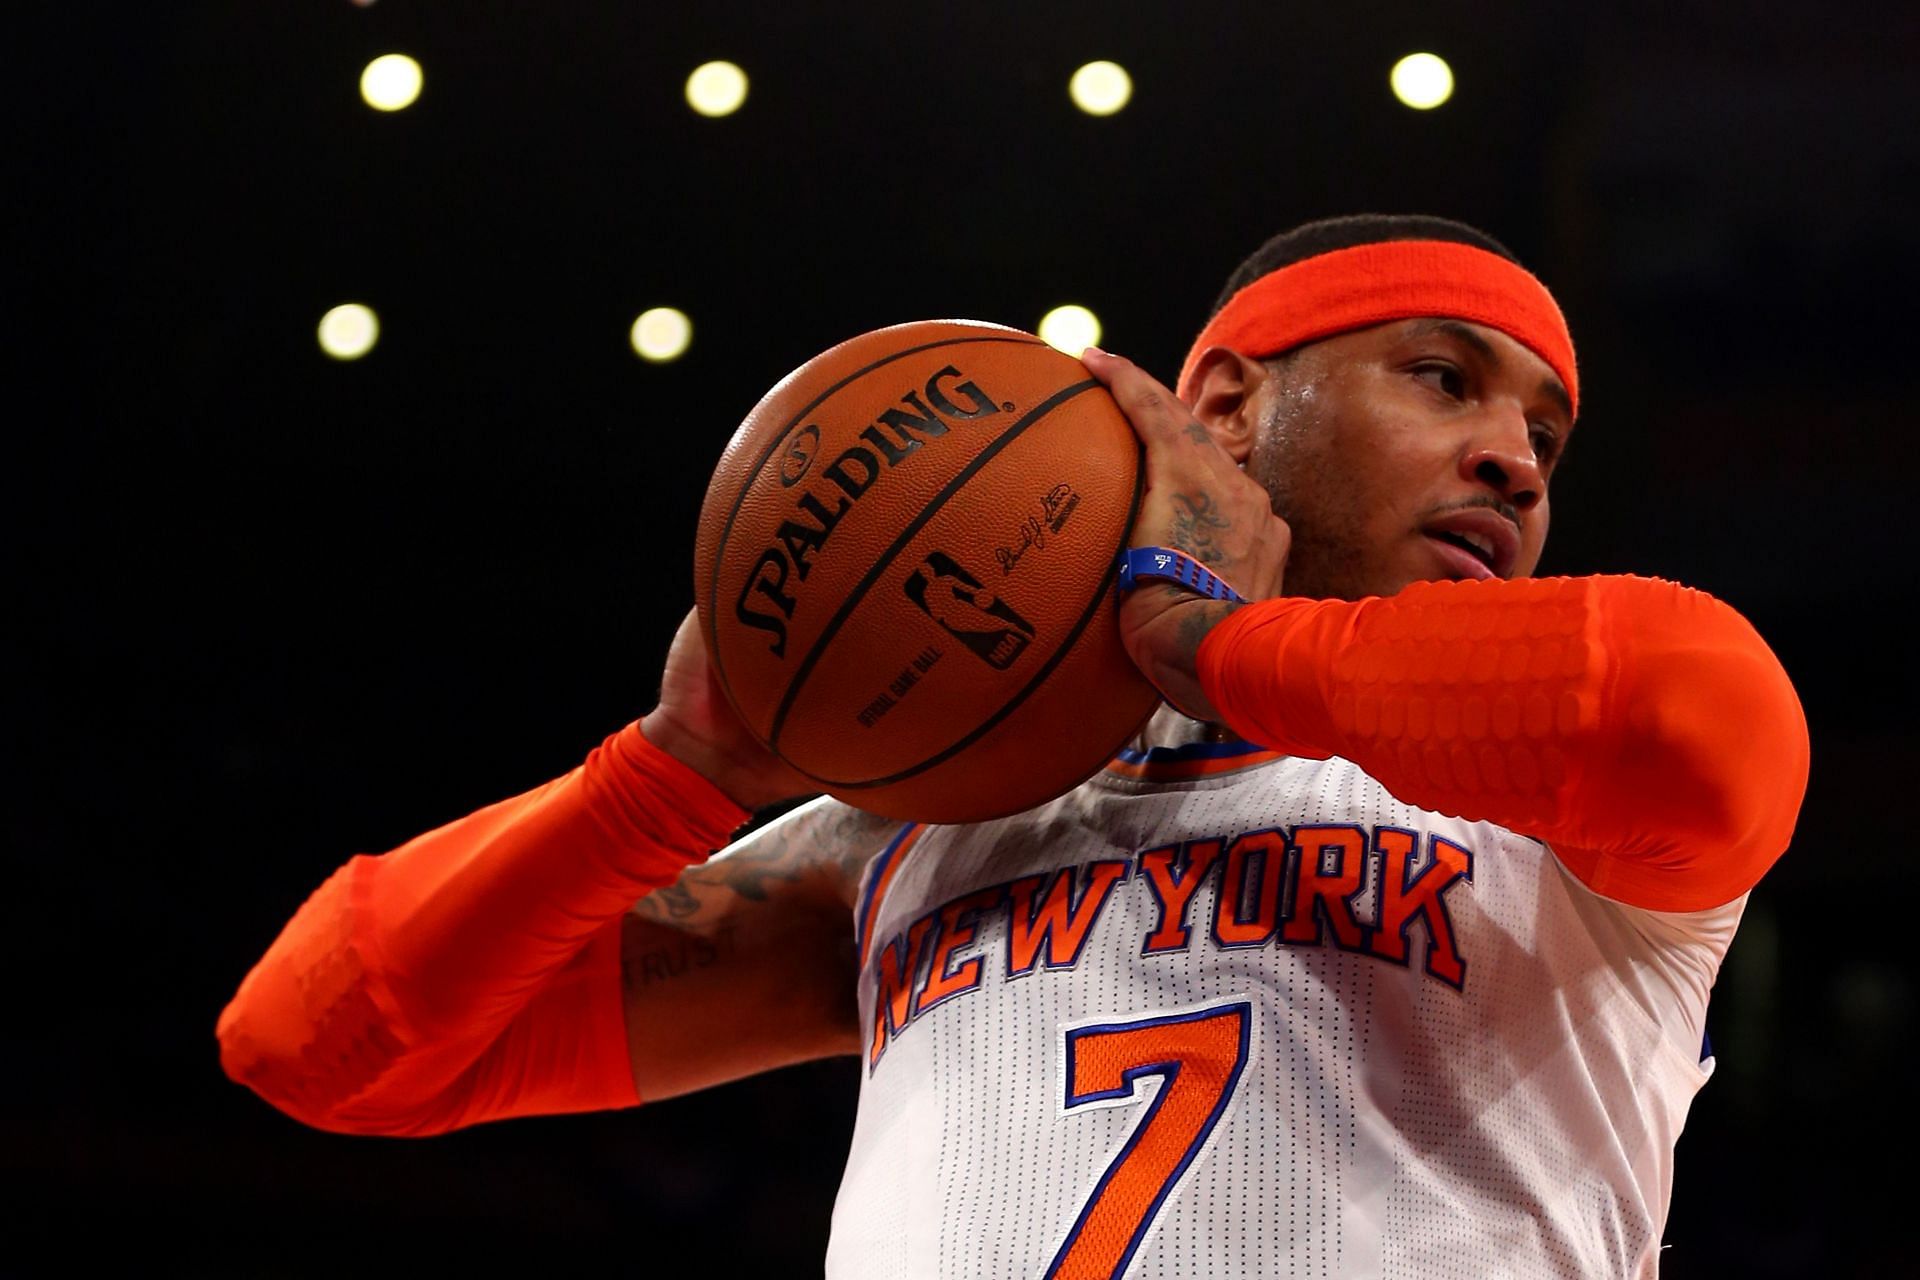 Carmelo Anthony with the New York Knicks.